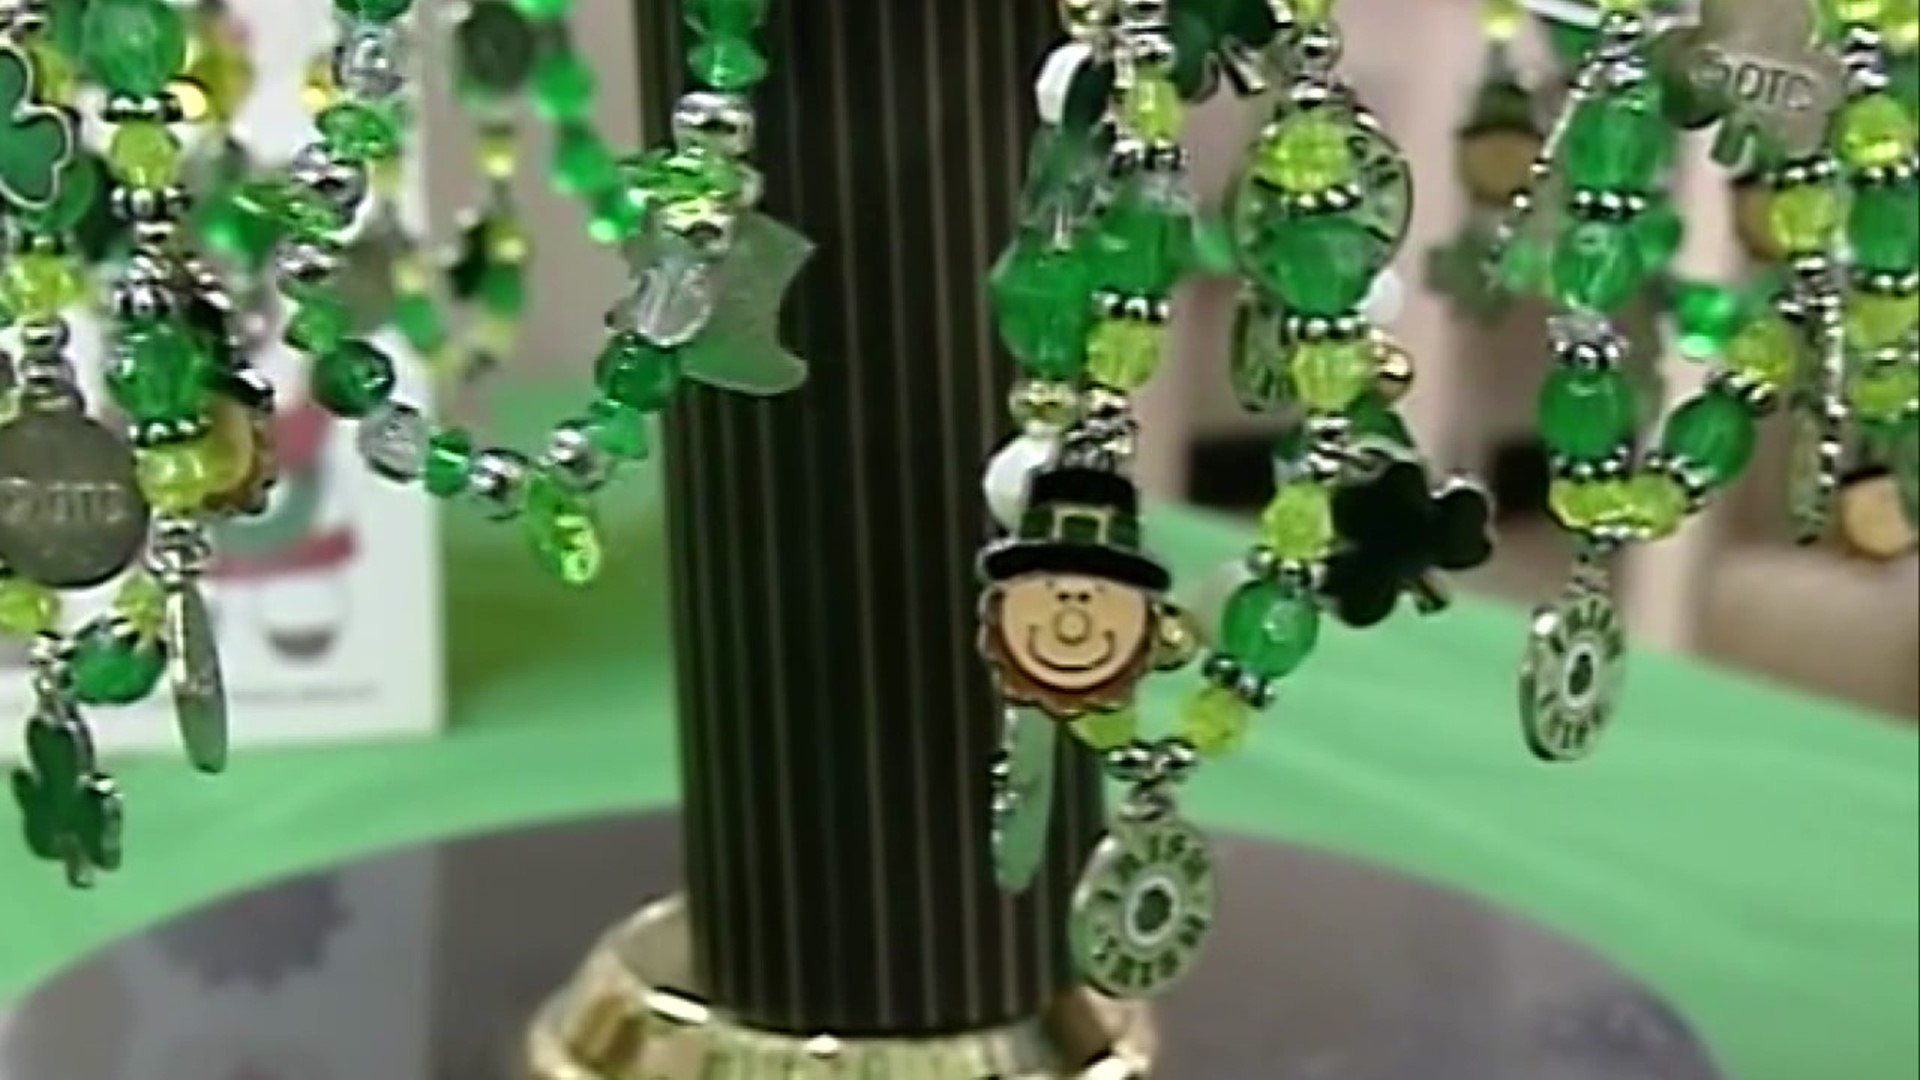 With plenty of St. Patrick's Day traditions to celebrate, Mike Stevens takes us on a trip to 2006 to appreciate all the little Irish details.